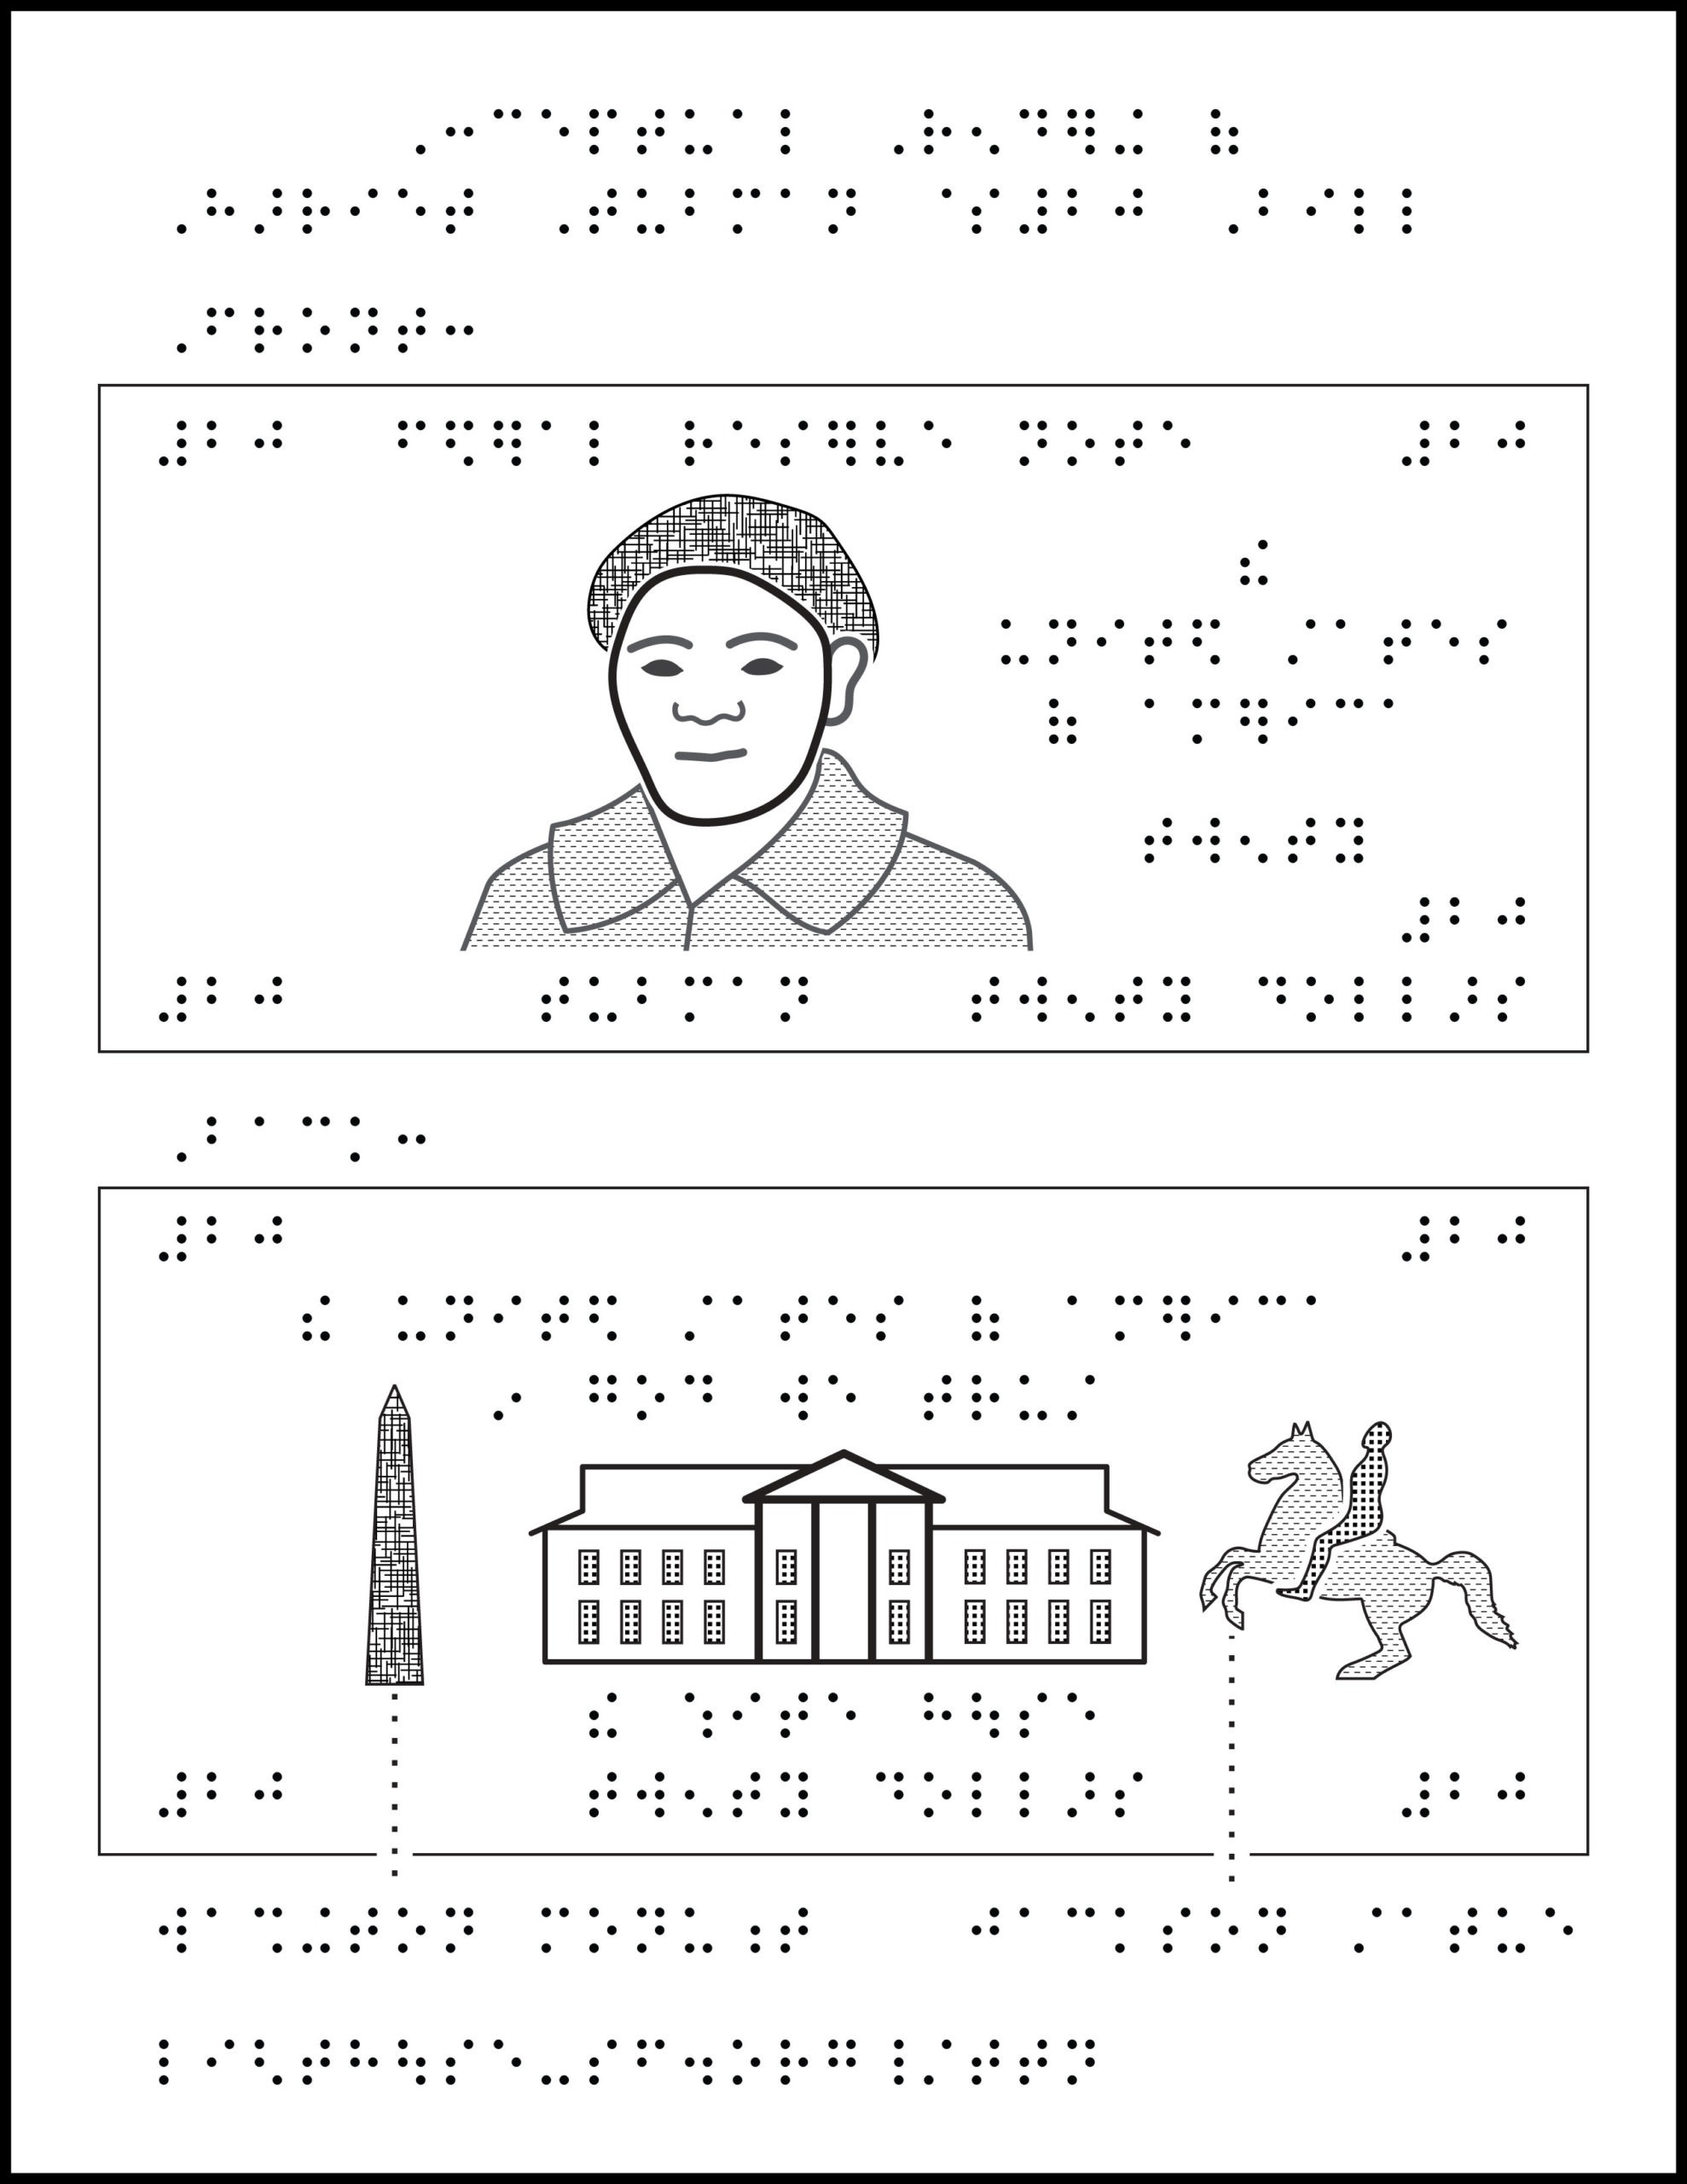 Digital illustration of $20 bill with braille labels, including Harriet Tubman on front, Washington Monument, White House, and Andrew Jackson statue on back.